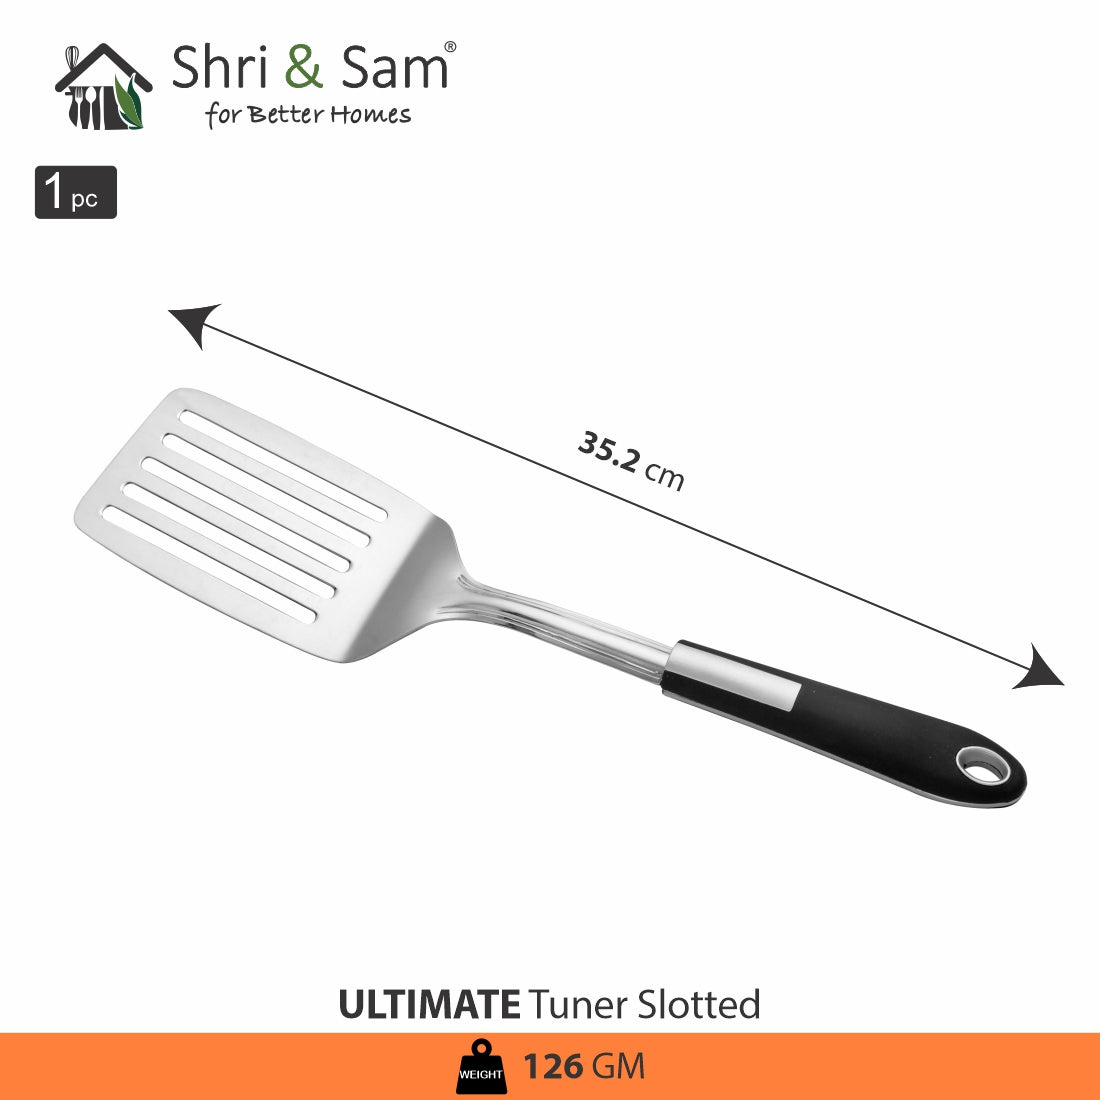 Stainless Steel Turner Slotted Ultimate